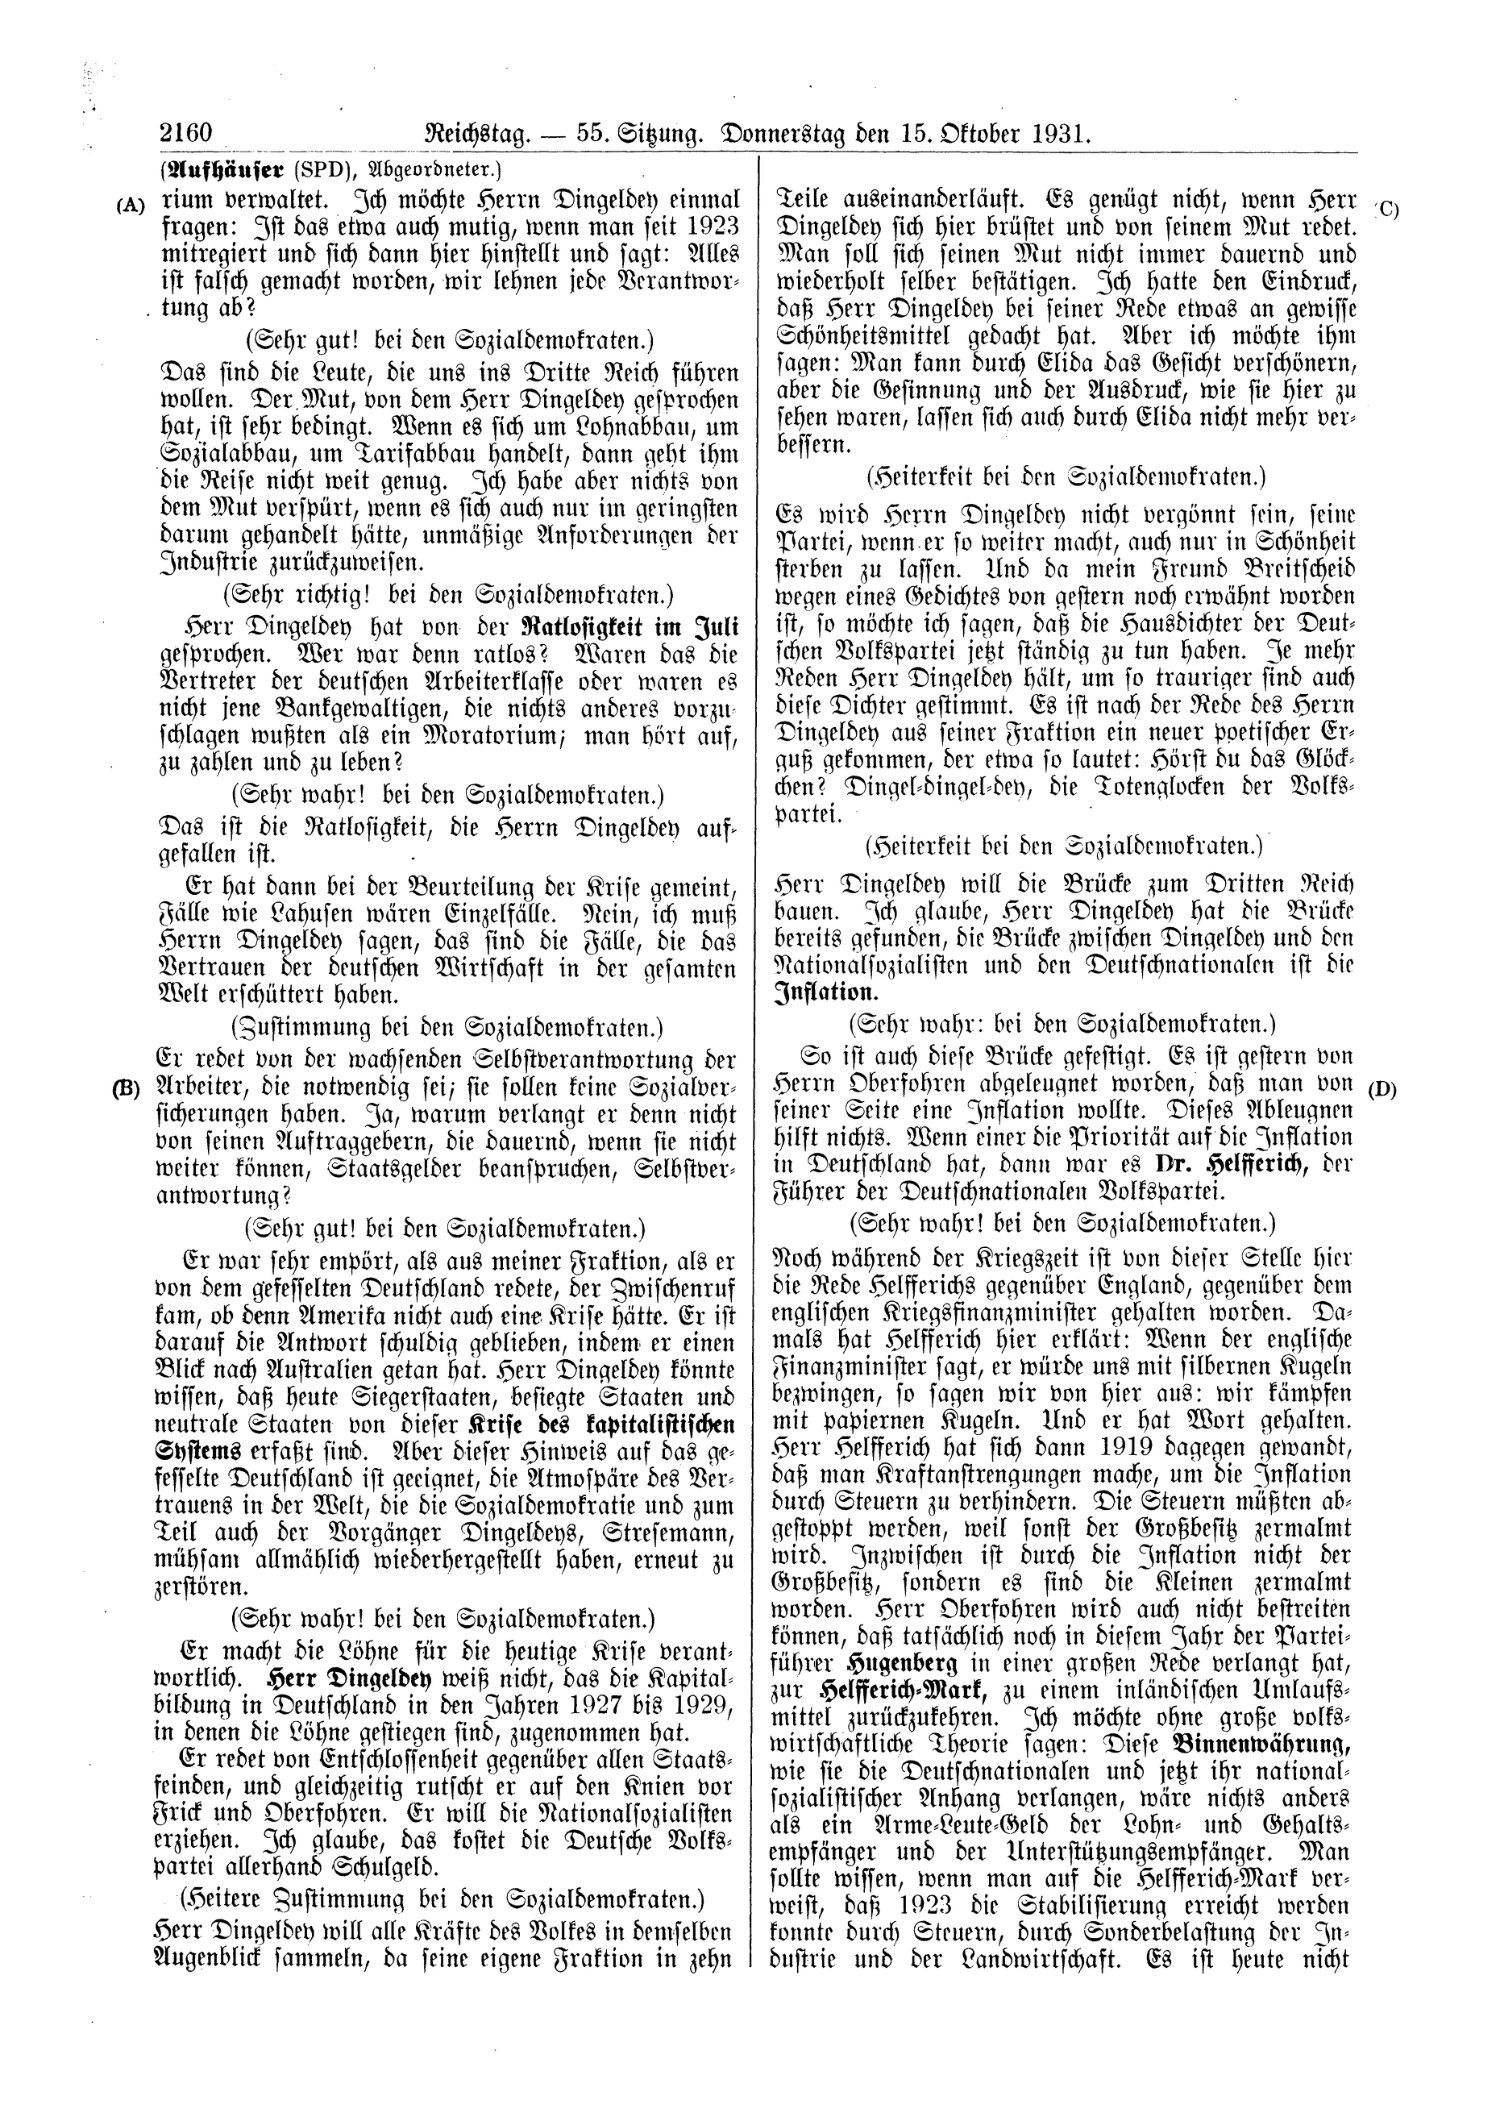 Scan of page 2160